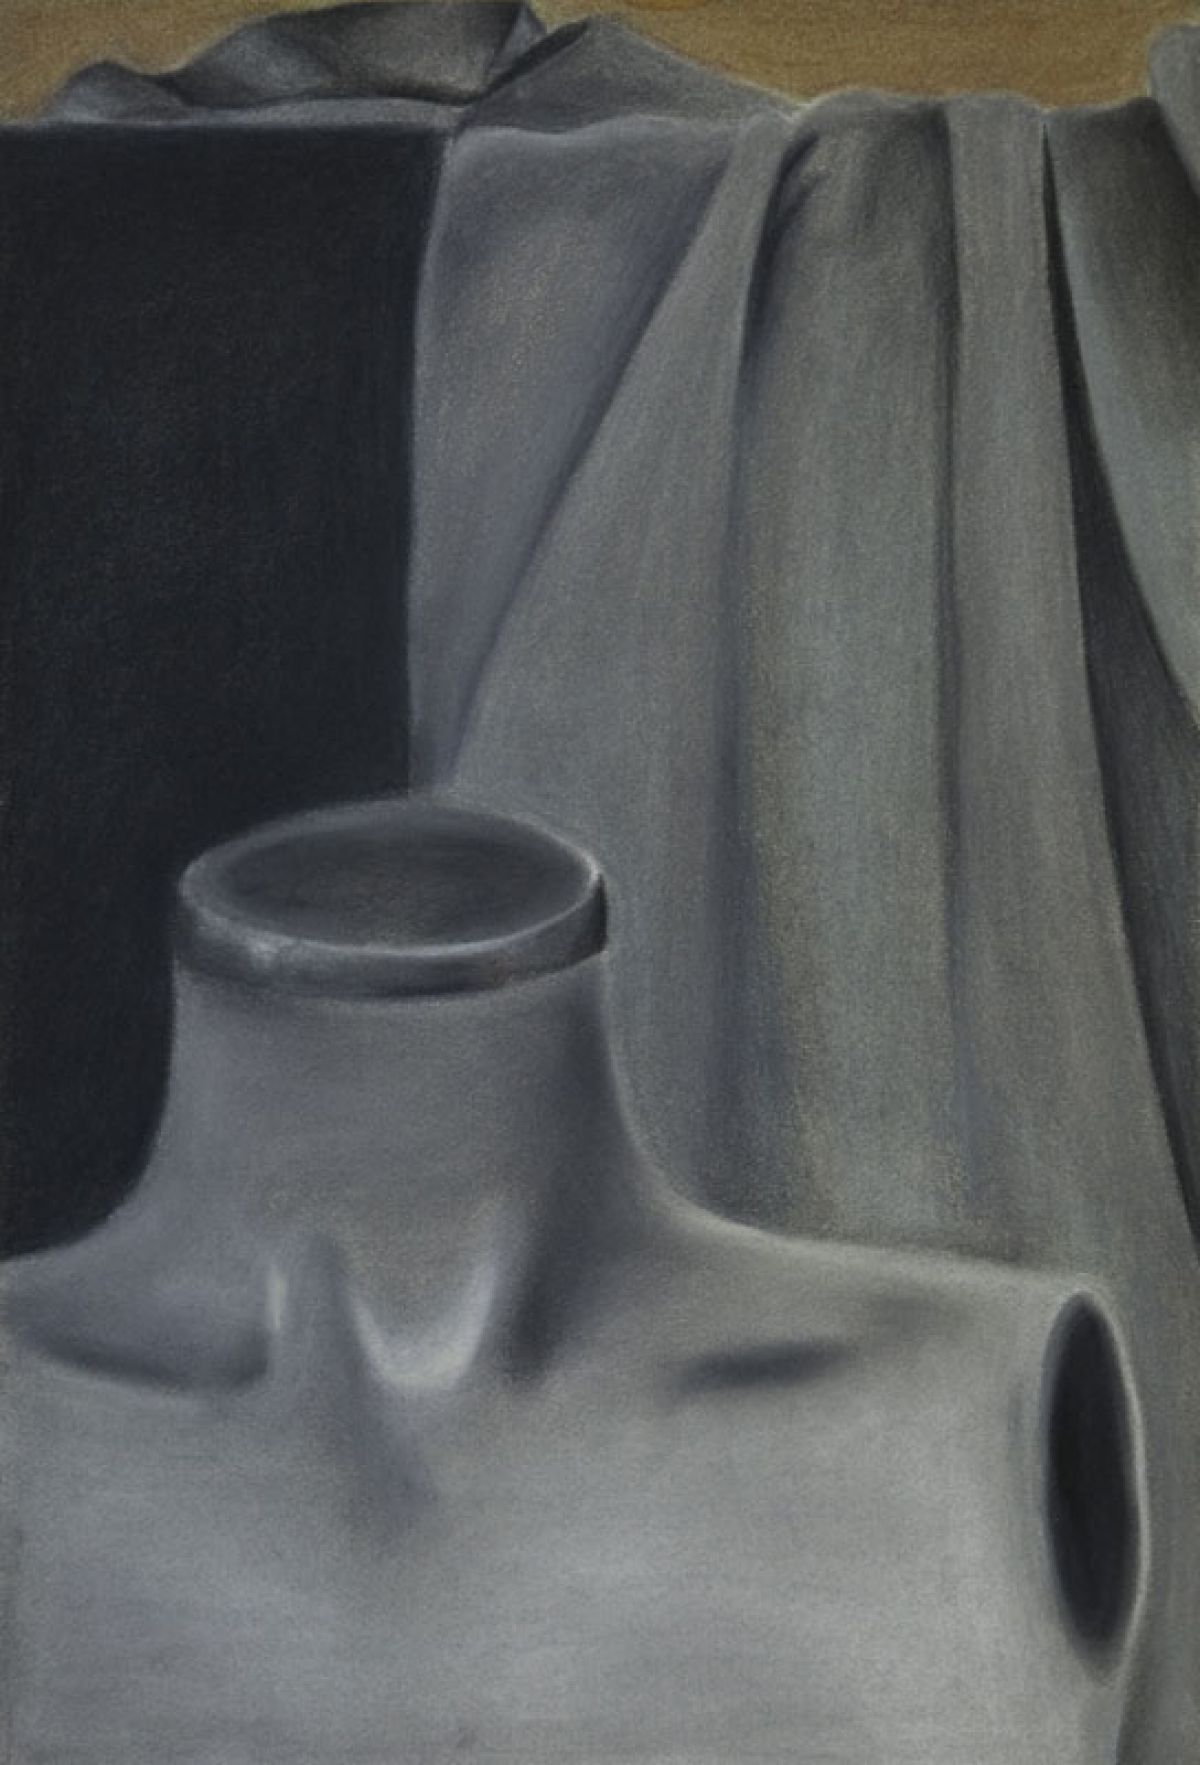 2009, Pastel on Paper, 18 1/2 x 13 in.